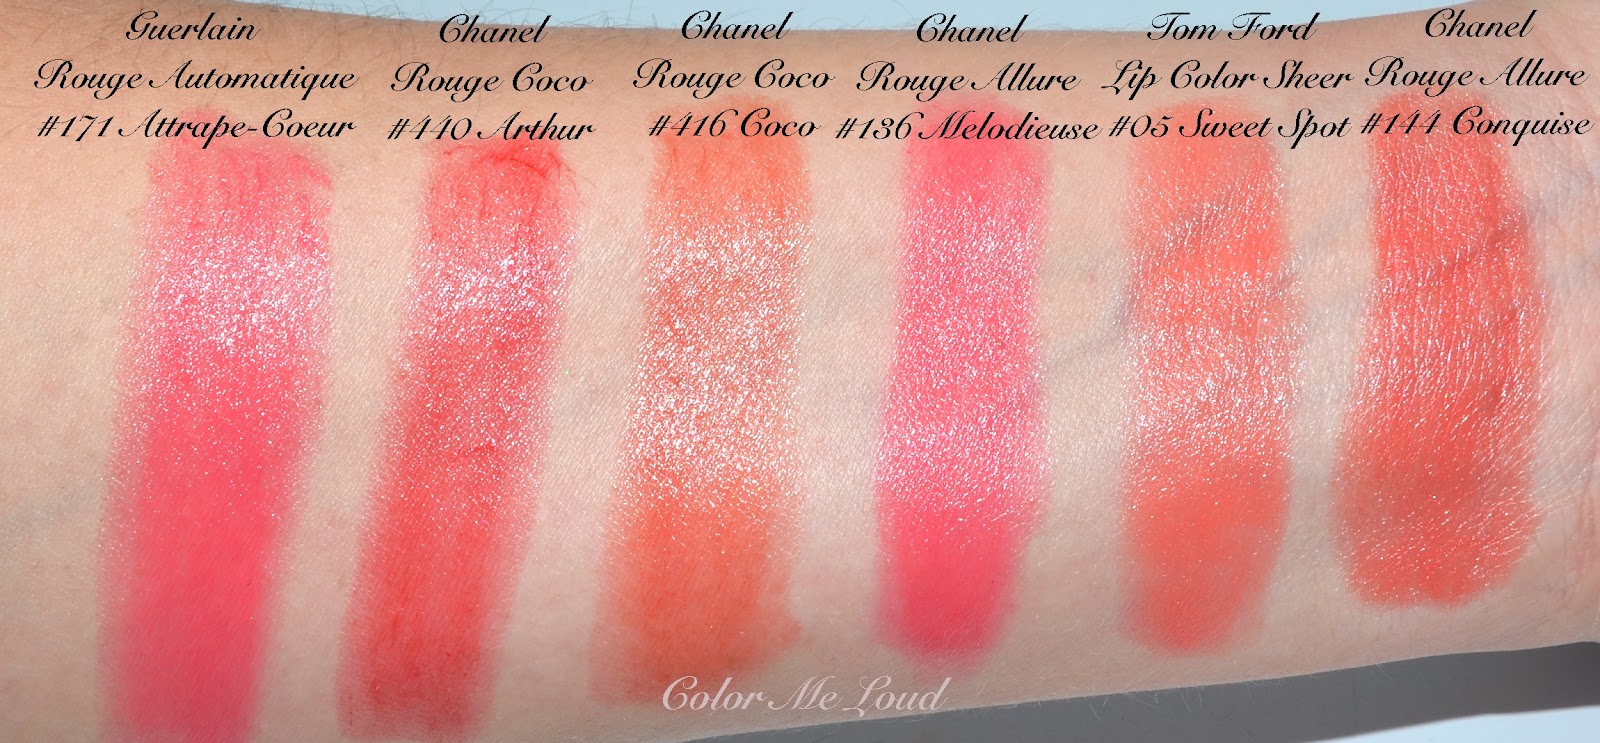 Chanel Suzanne (438) Rouge Coco Lipstick (2015) Review & Swatches